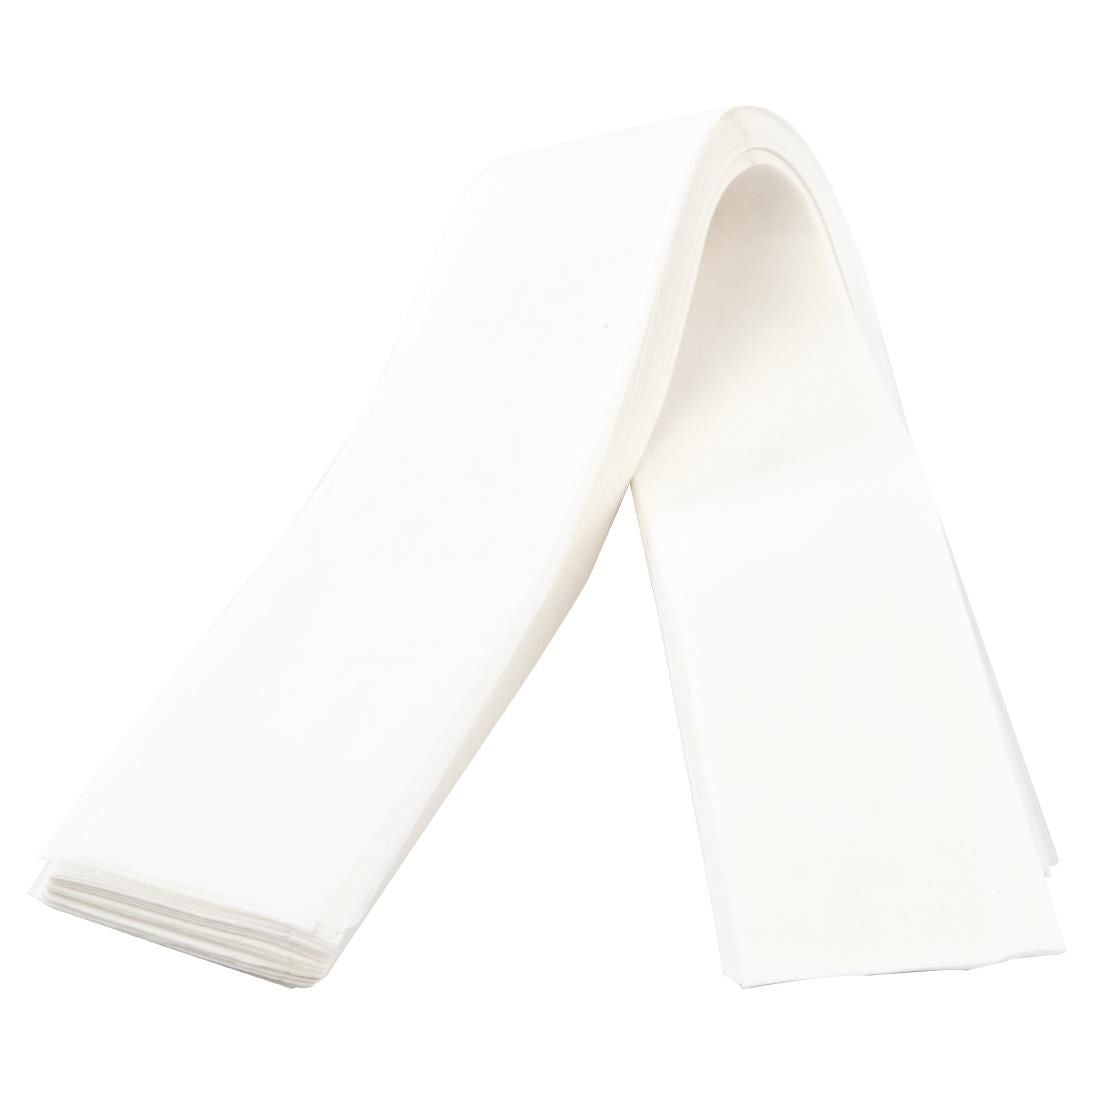 WA454 Waring Filter Papers ref 501289 (Pack of 200)